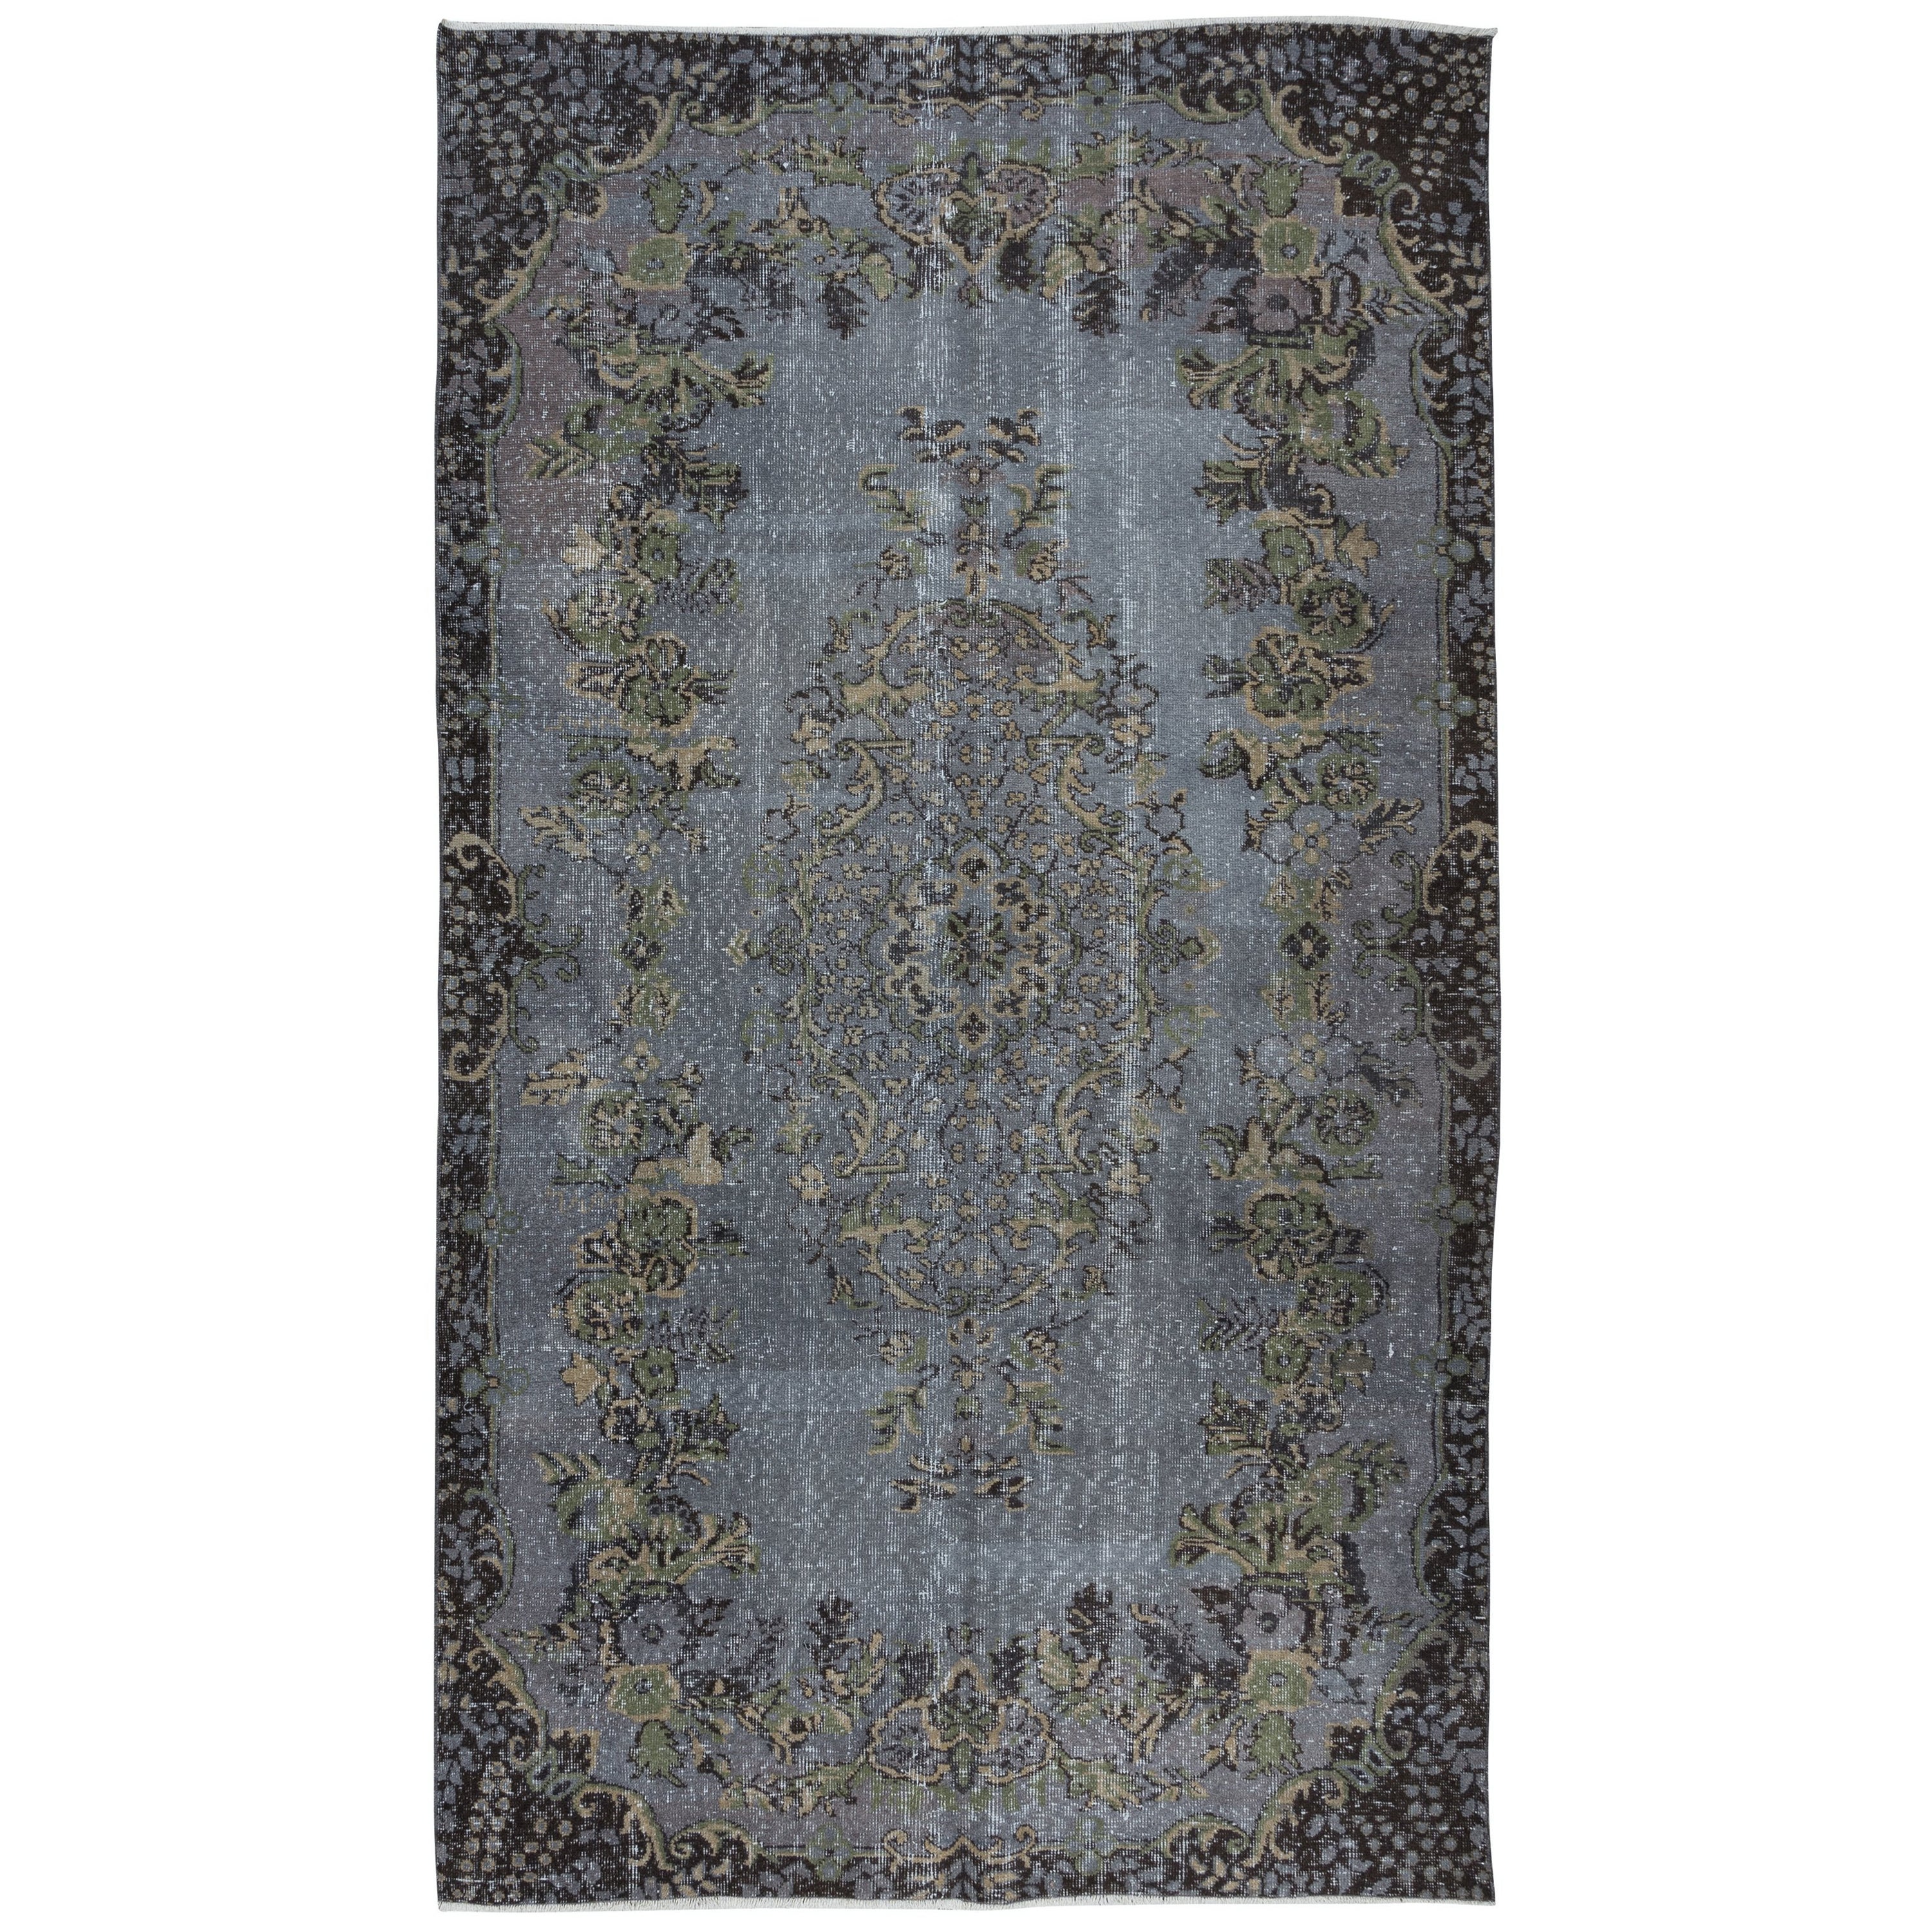 5.7x9.8 Ft Hand Made Turkish Rug with Medallion in Iron Gray, Beige & Army Greene en vente